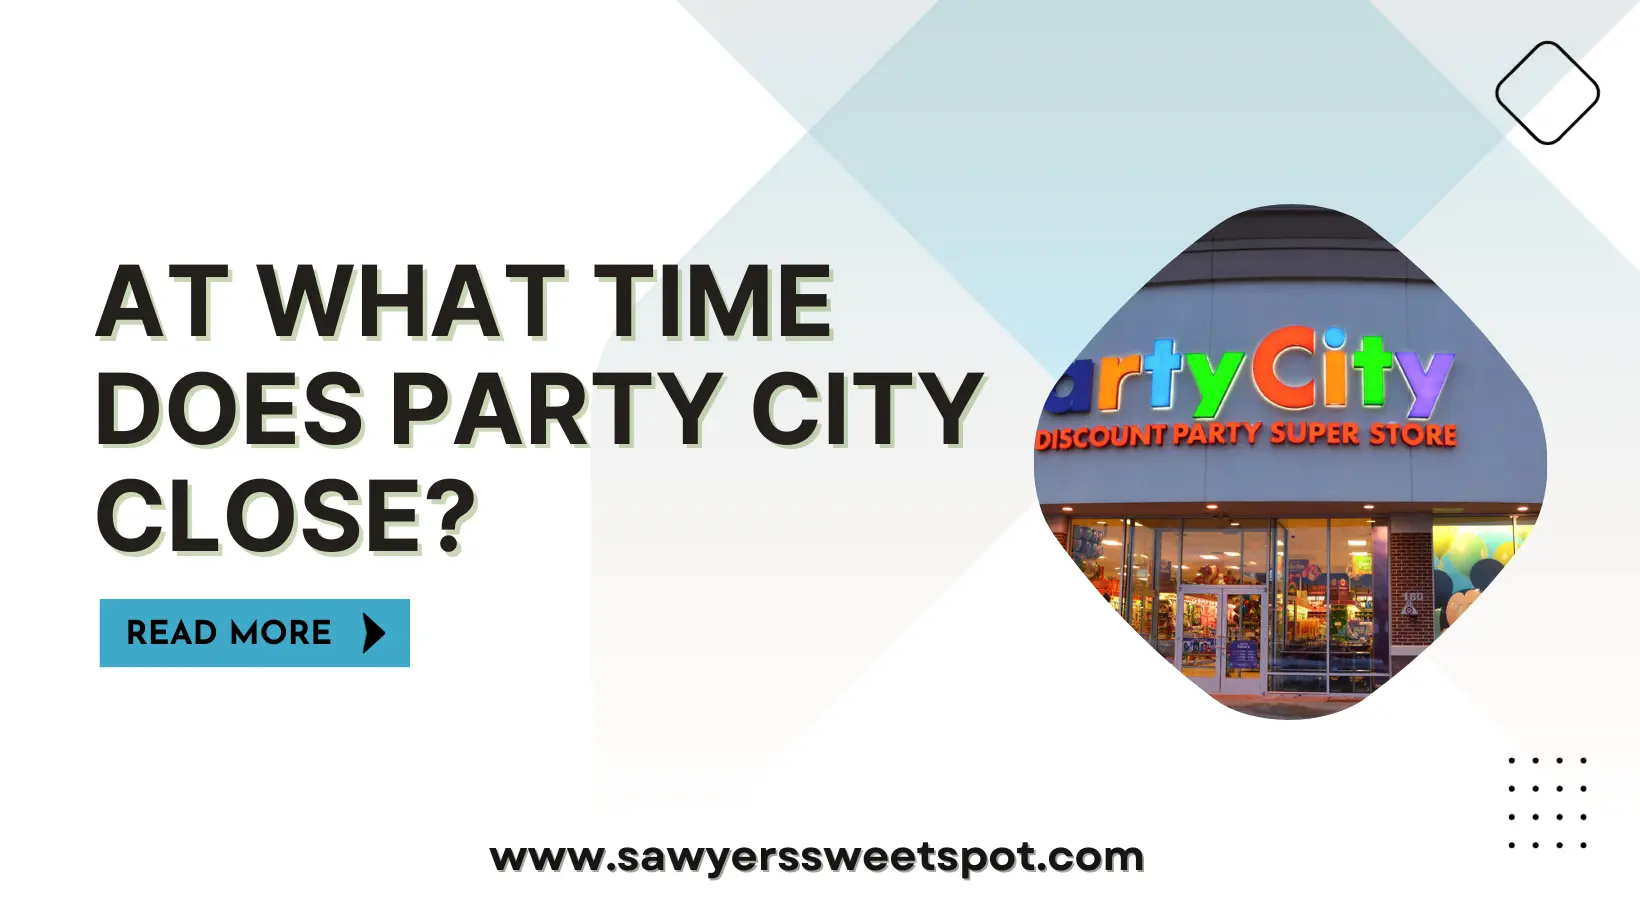 At What Time Does Party City Close?